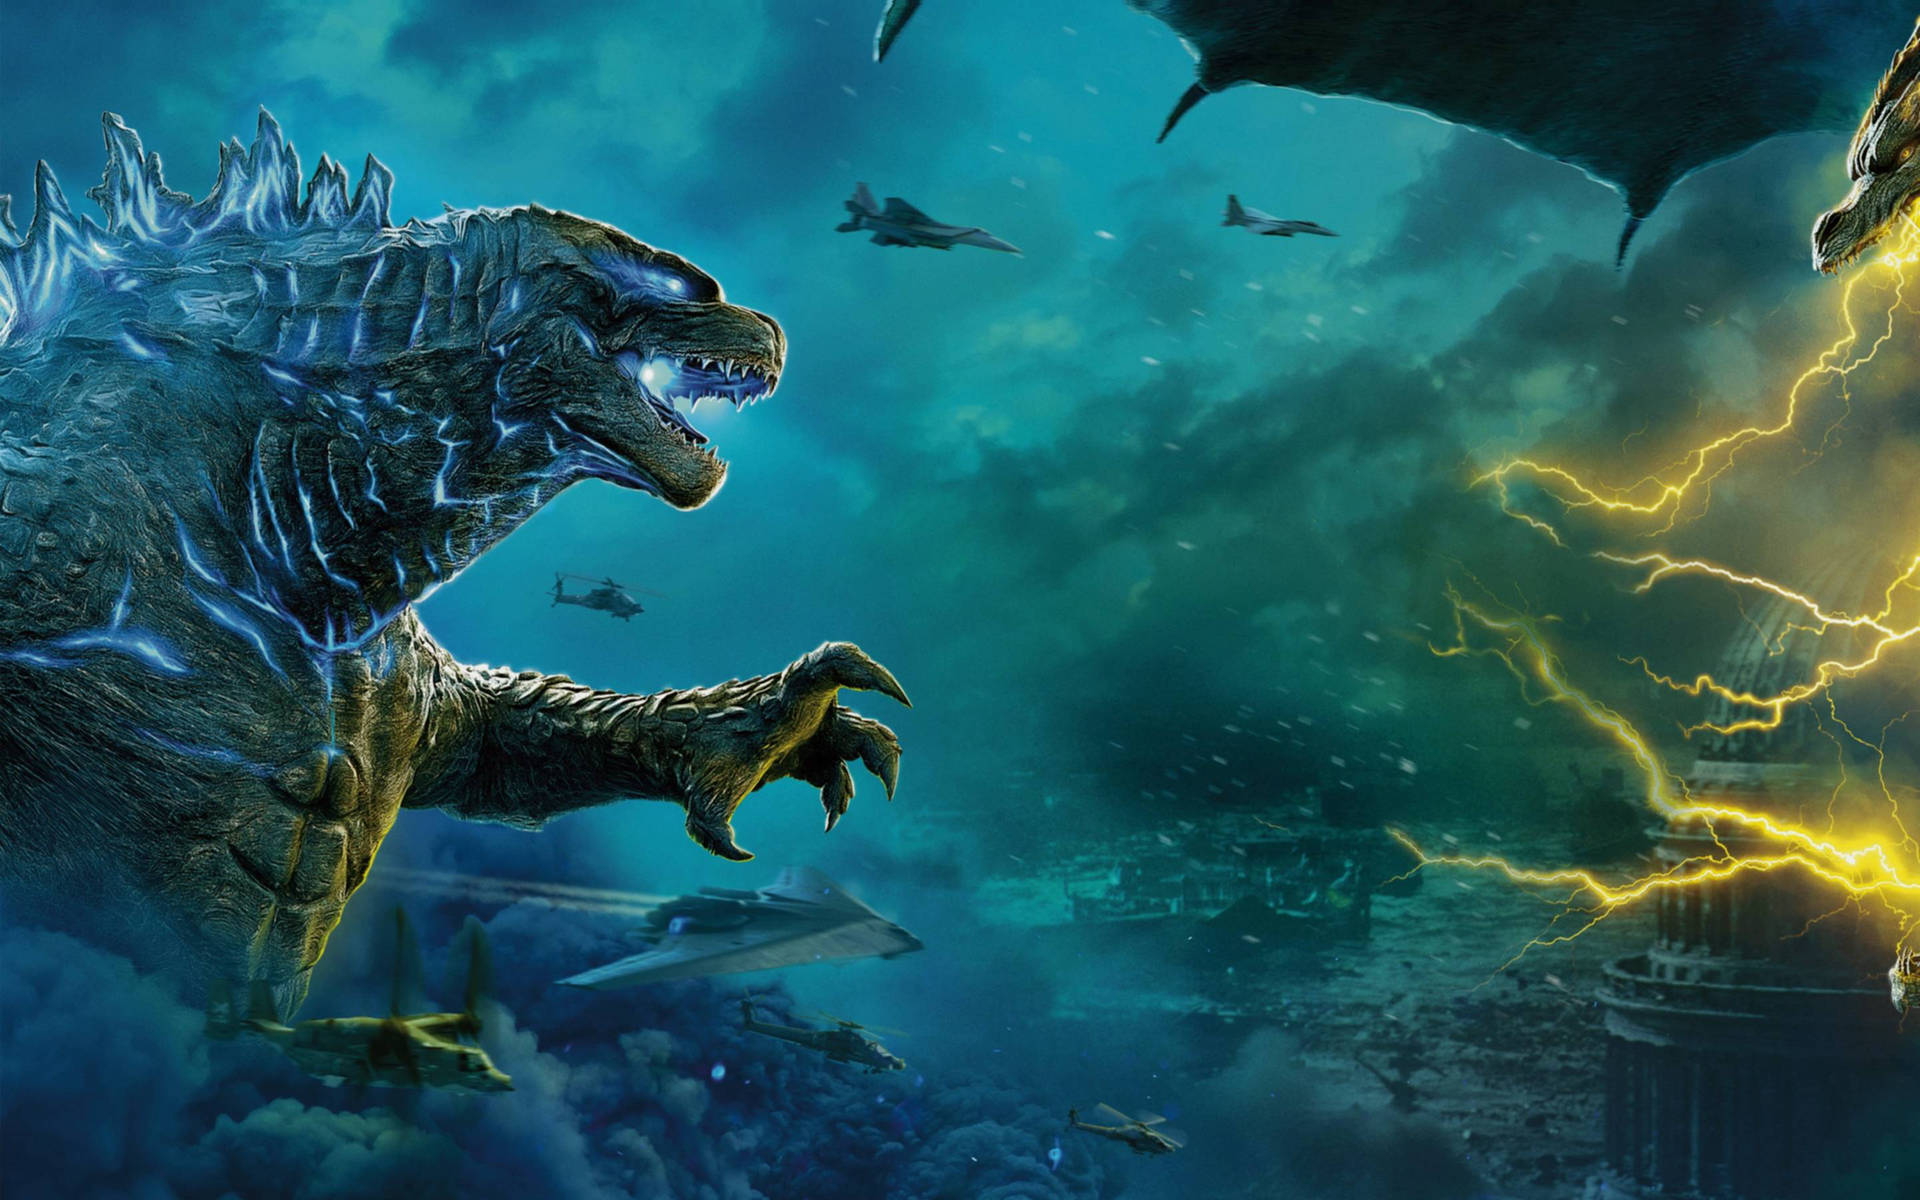 Download Hd Aesthetic Godzilla King Of The Monsters Wallpaper | Wallpapers .com